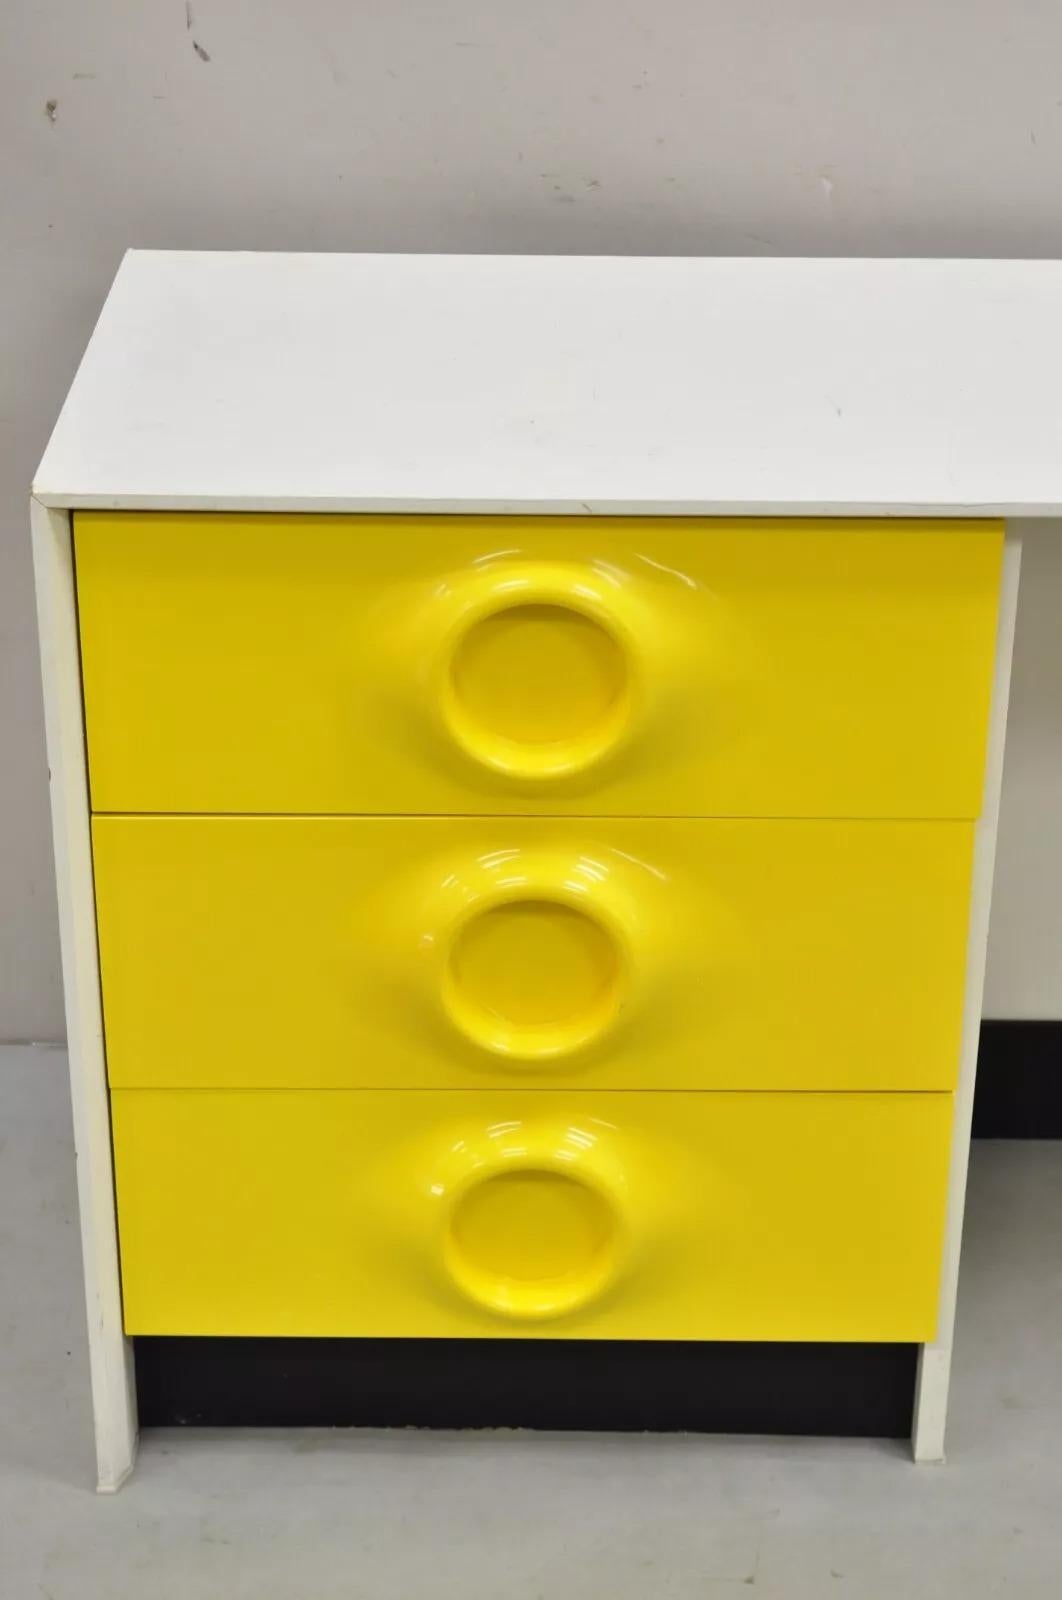 Vintage Broyhill Premier Yellow Molded Plastic Space Age Joe Colombo Style 3 Drawer Desk. Circa 1970s. Measurements: 30.5